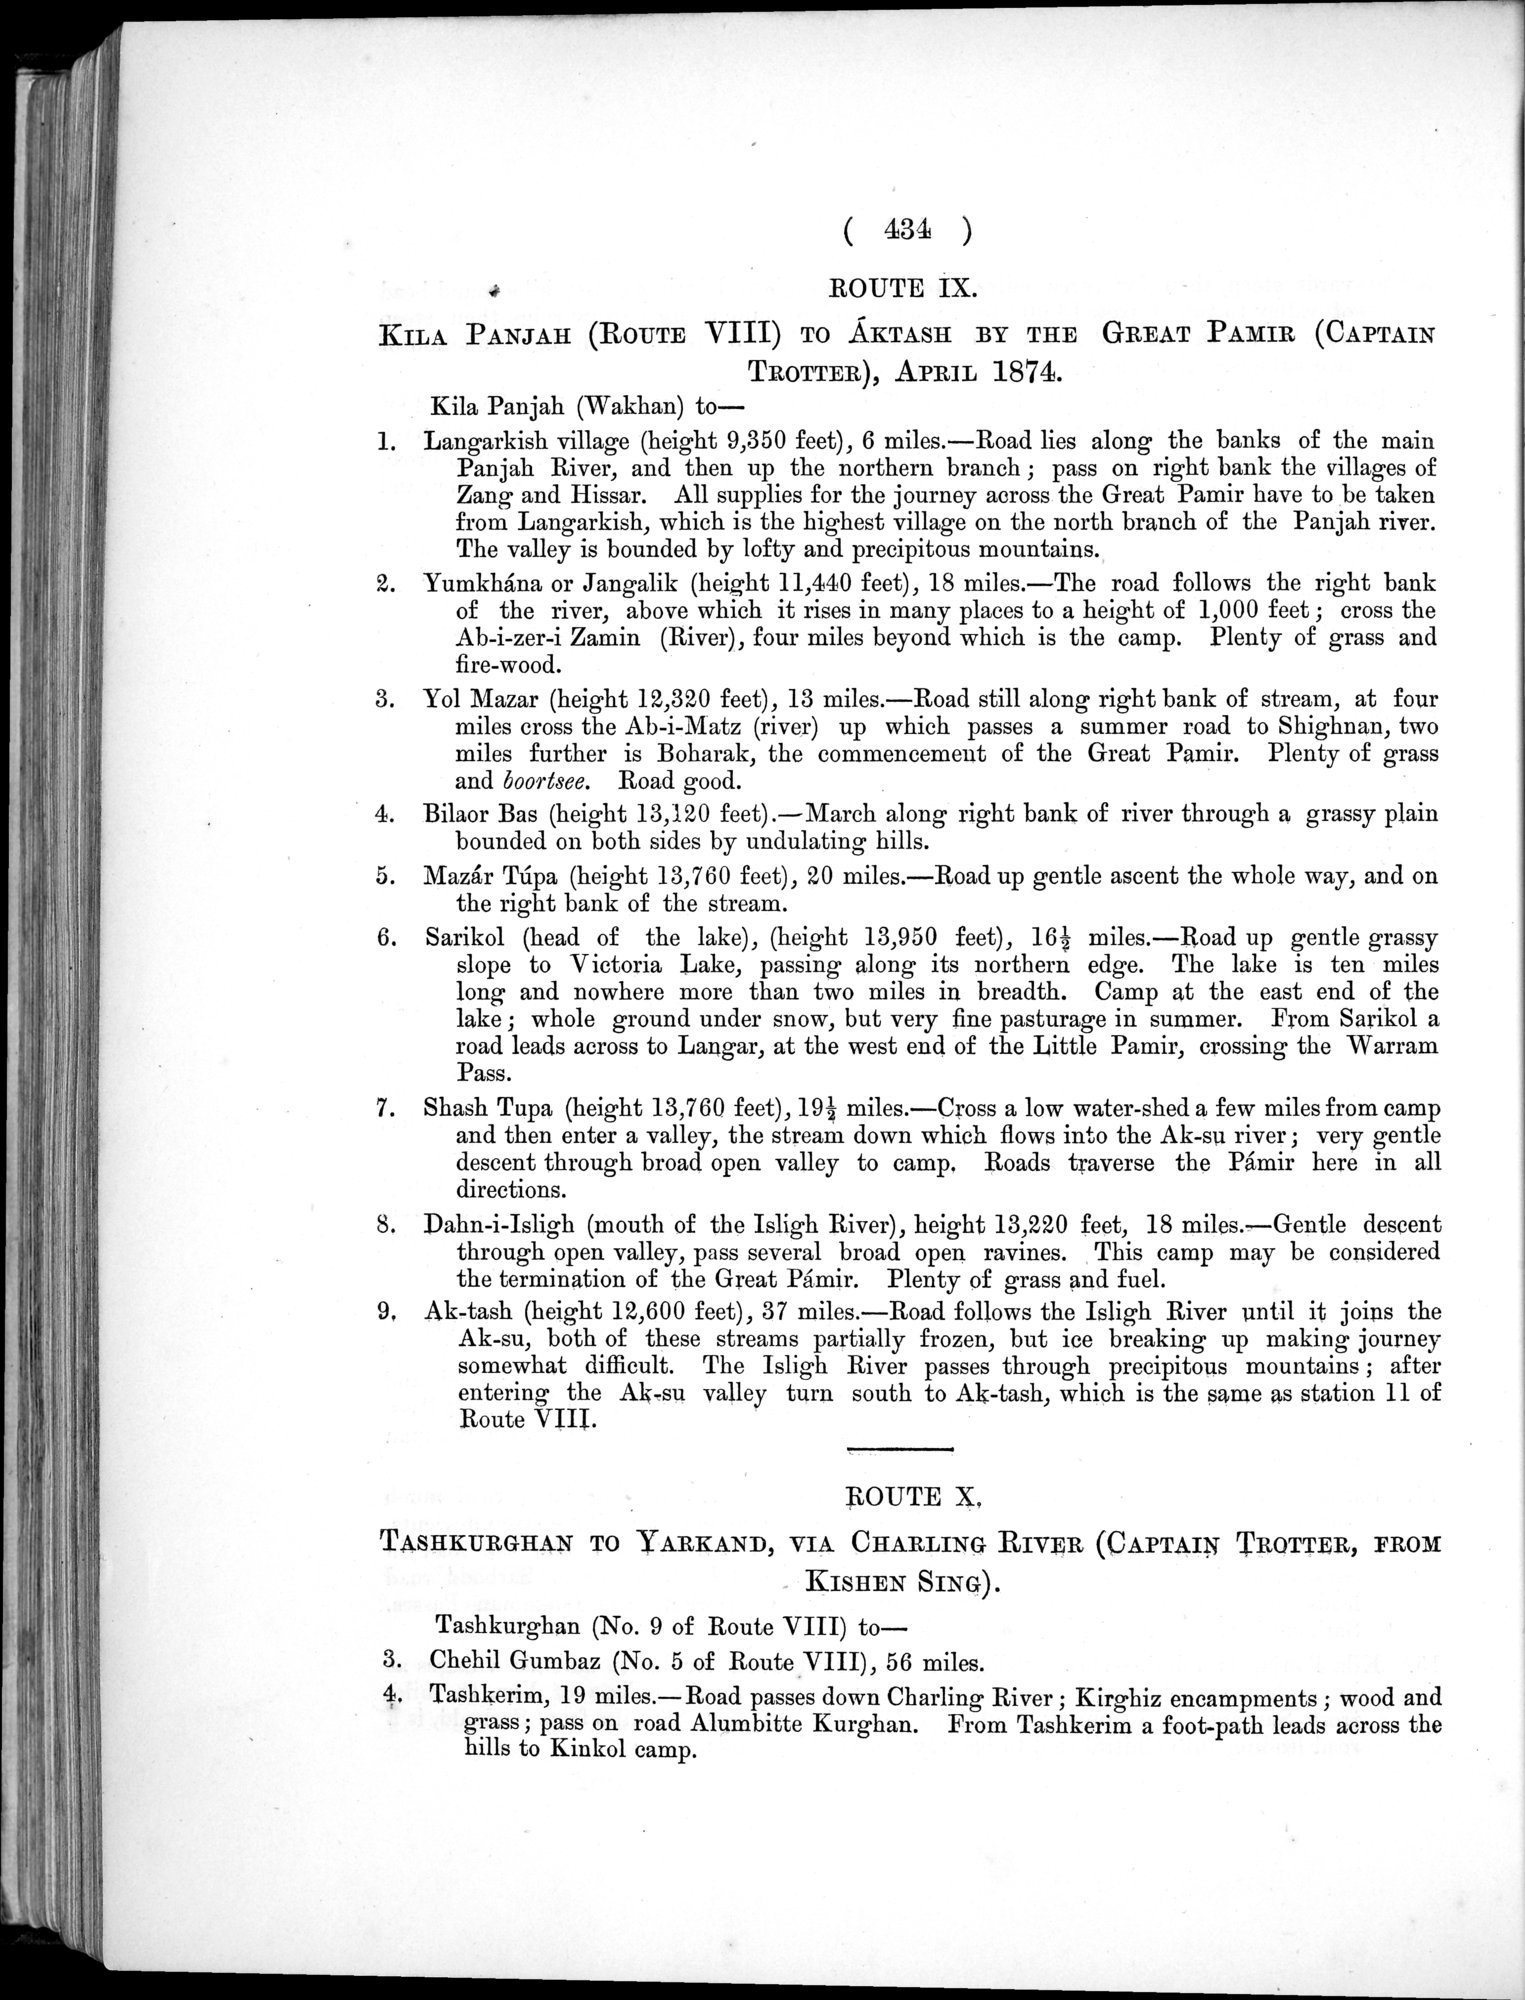 Report of a Mission to Yarkund in 1873 : vol.1 / Page 568 (Grayscale High Resolution Image)